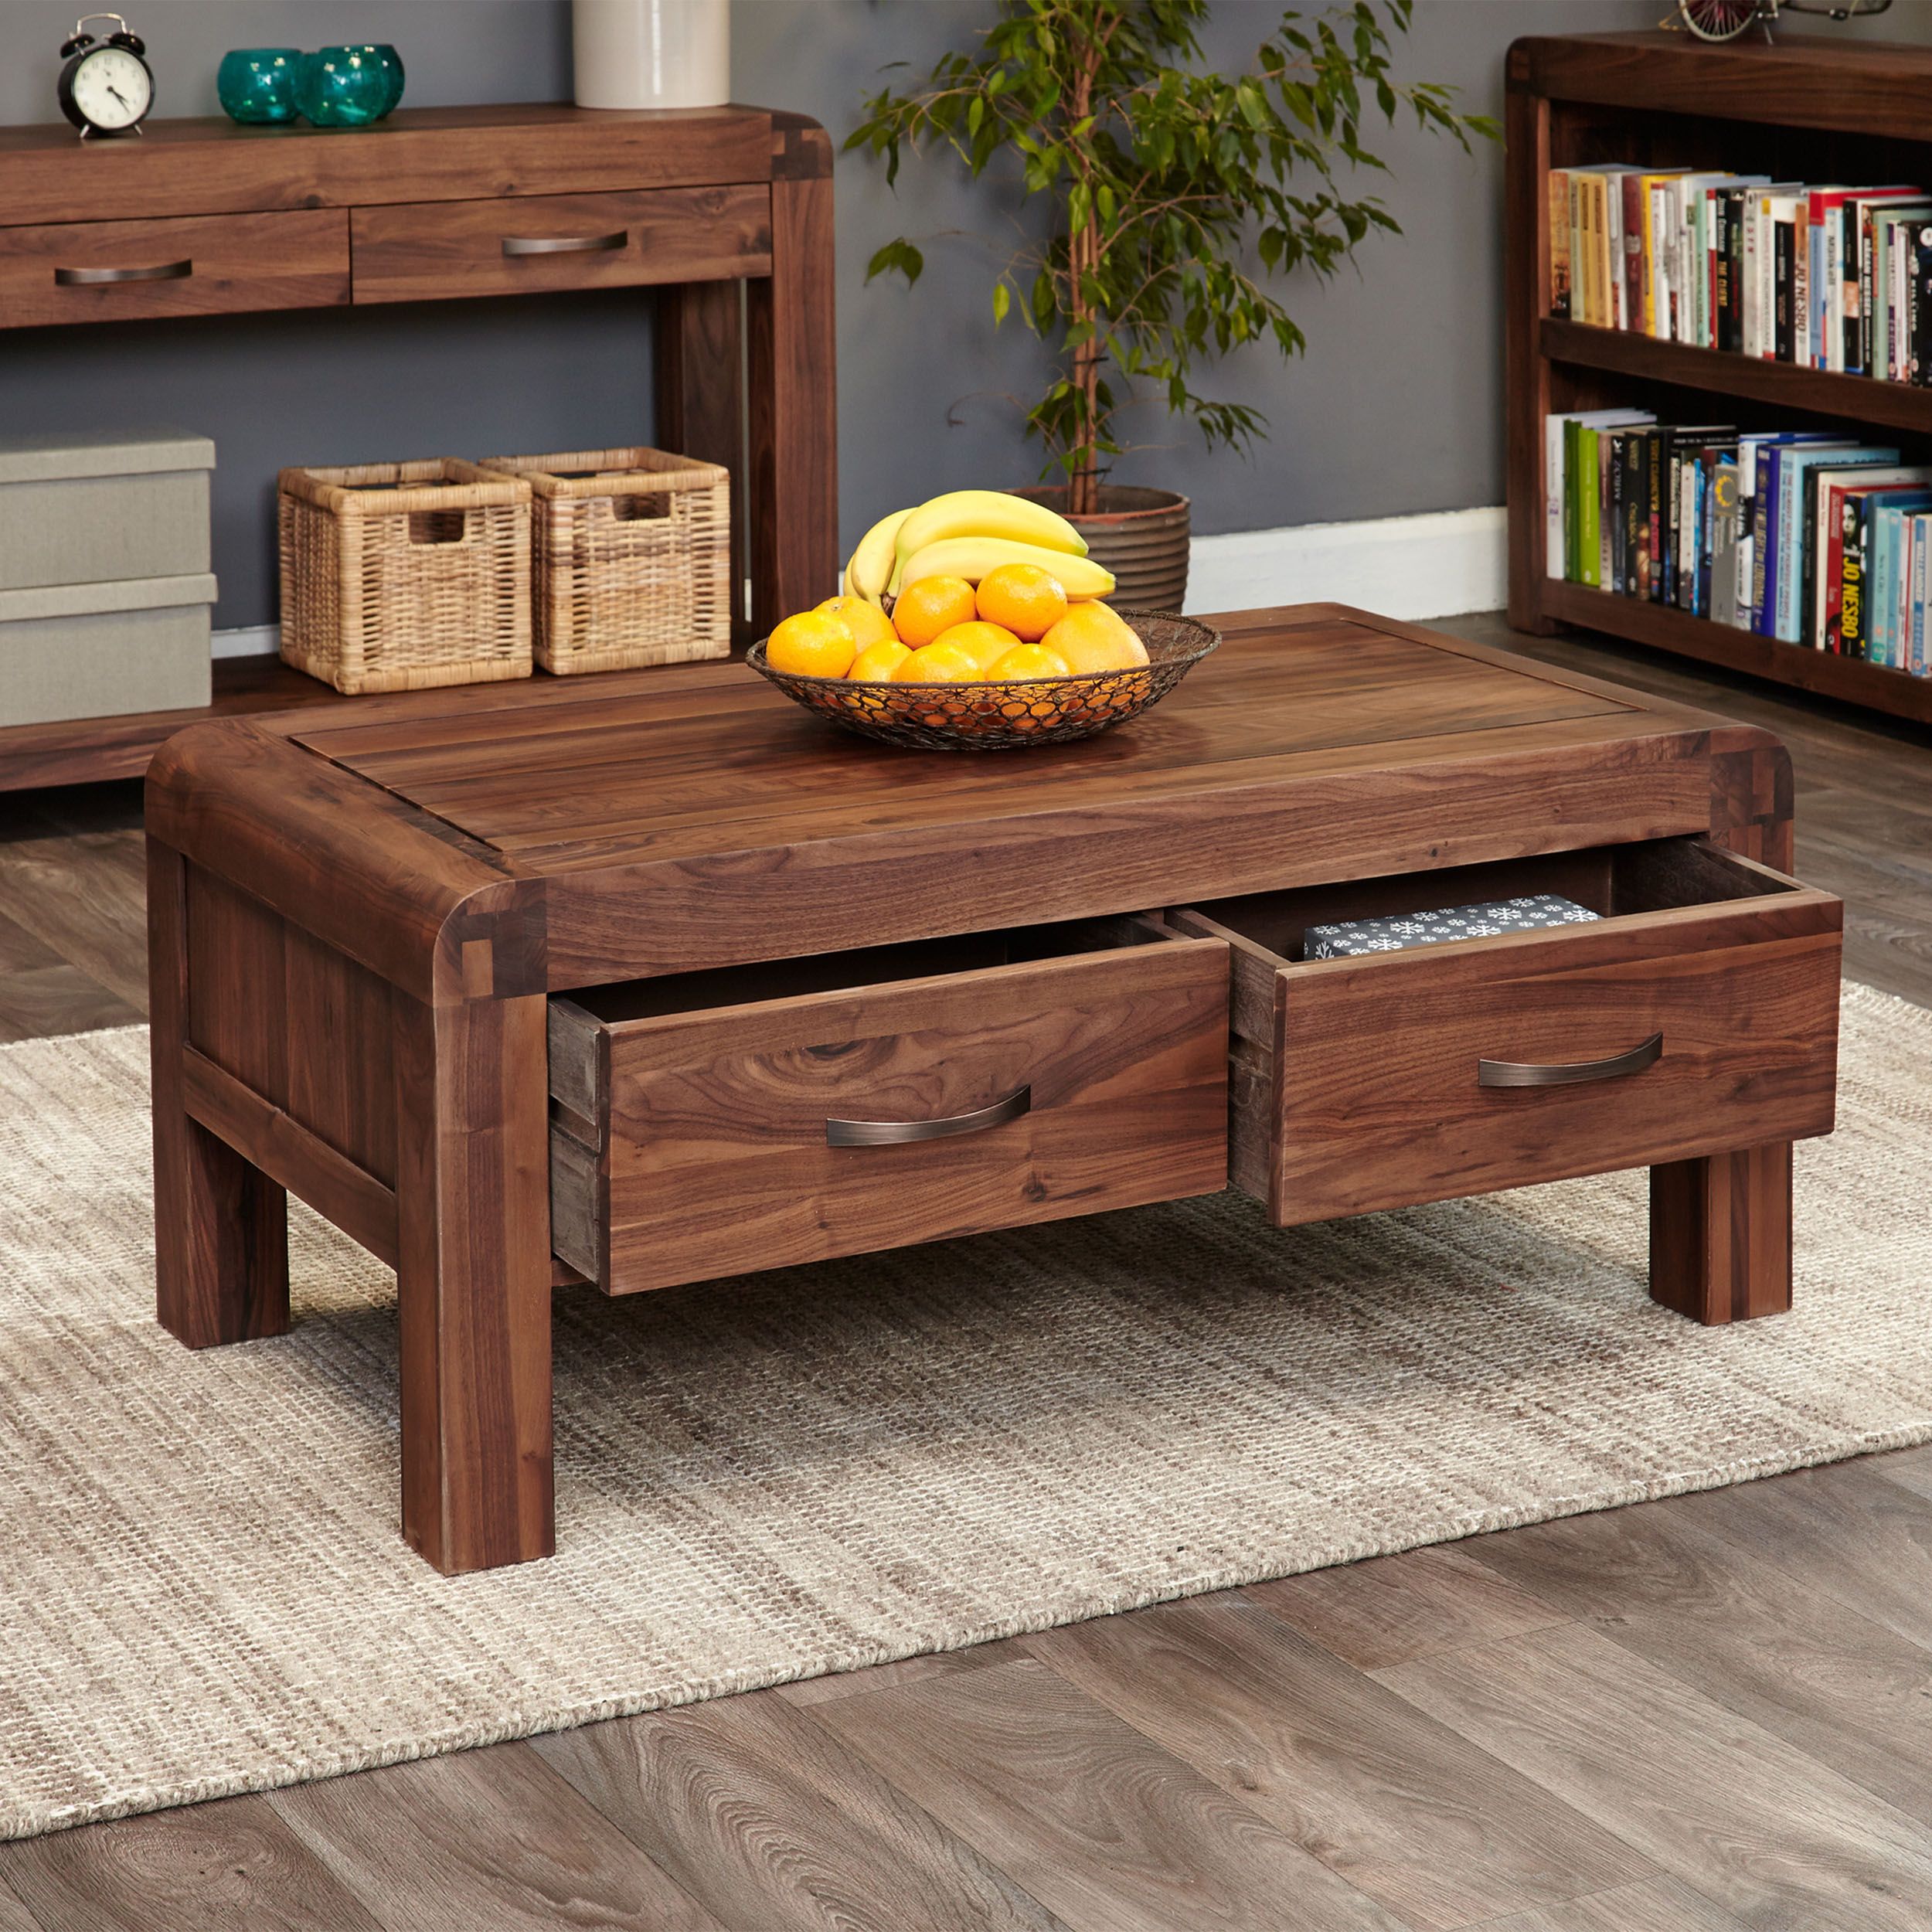 Solid Walnut Coffee Table With Storage – Shiro | Store Regarding Black Wood Storage Coffee Tables (View 2 of 15)